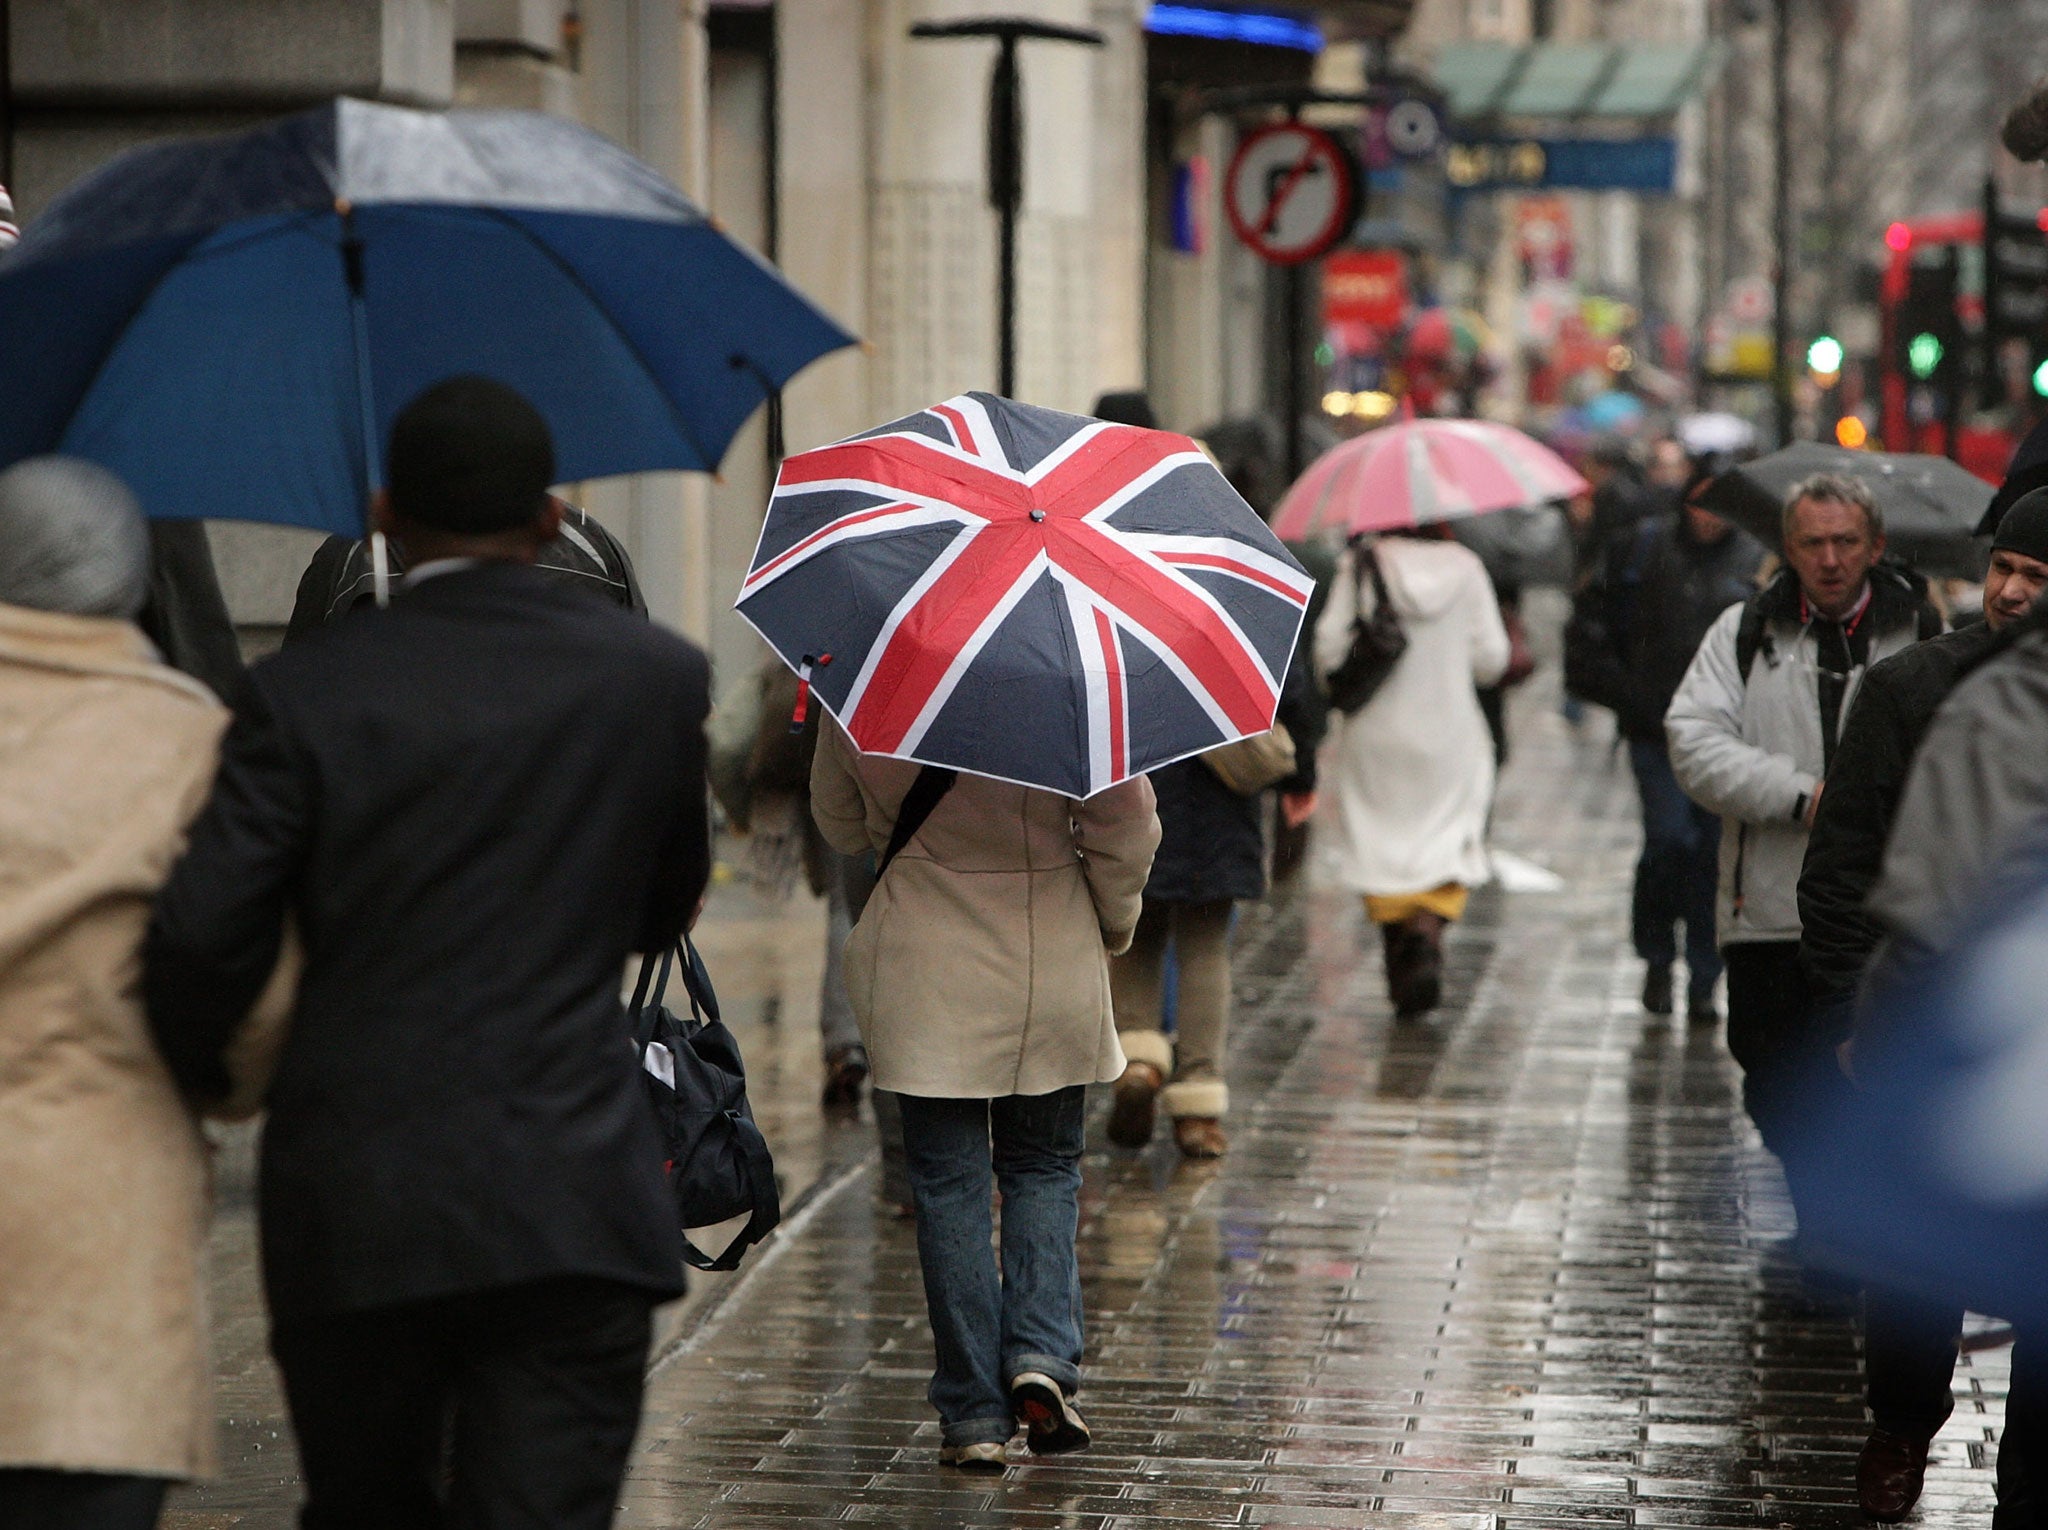 A woman holding a Union Flag umbrella walks along Oxford Street in the rain on January 23, 2009 in London, England.